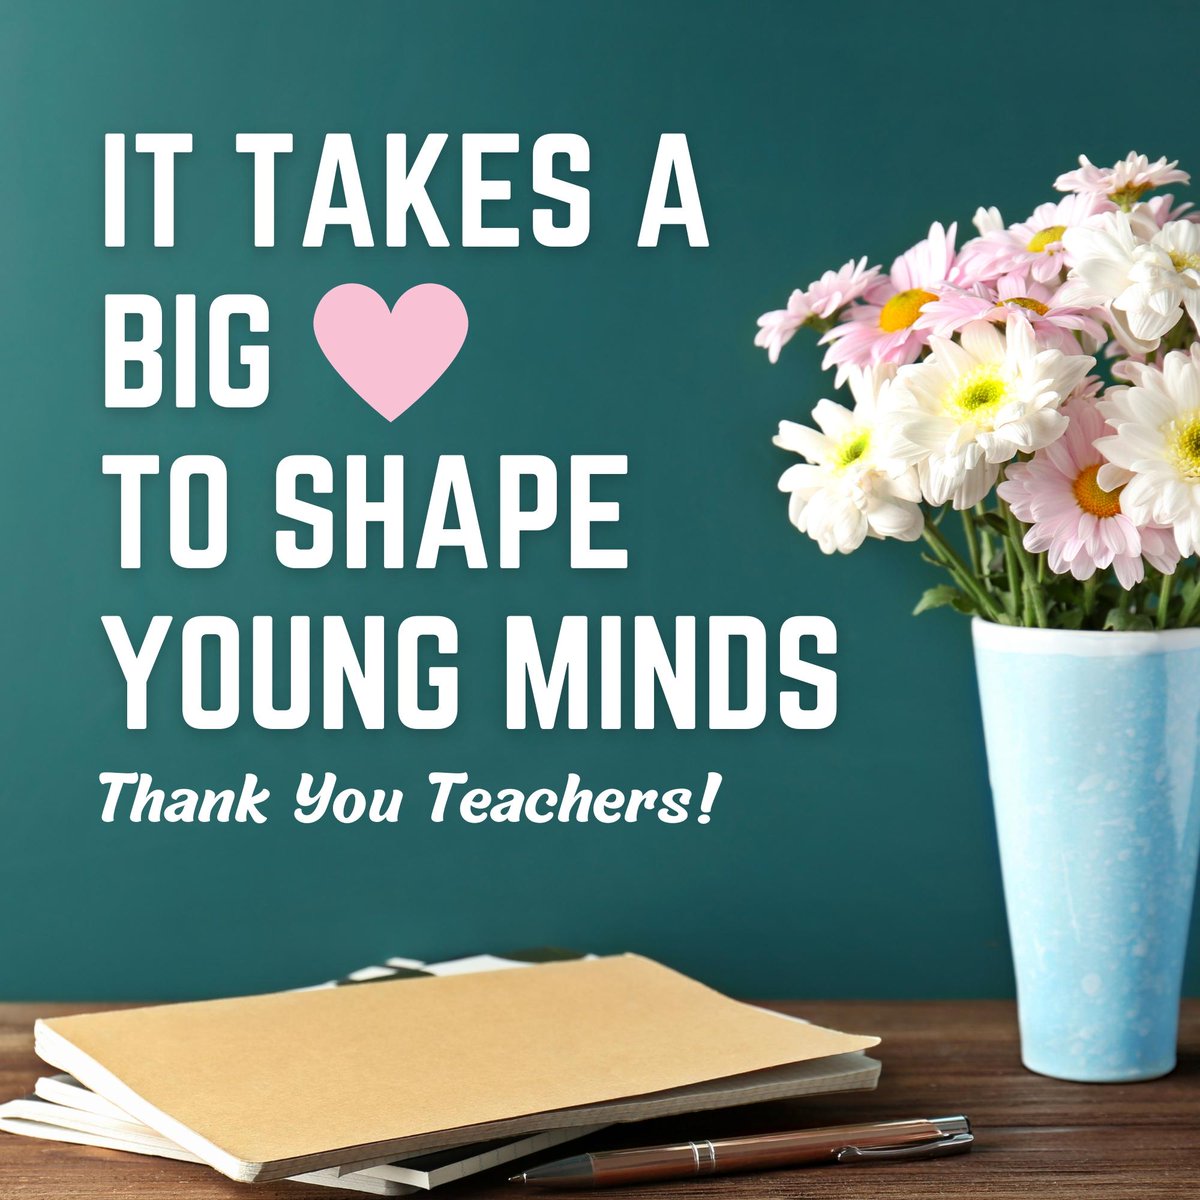 To our Oak Park teachers, 
This Teacher Appreciation Day, we want to give a heartfelt thank you for your dedication, passion, and tireless efforts. Your impact on our students' lives is immeasurable, and we are deeply grateful for all that you do! 💕
#ThankYouTeachers